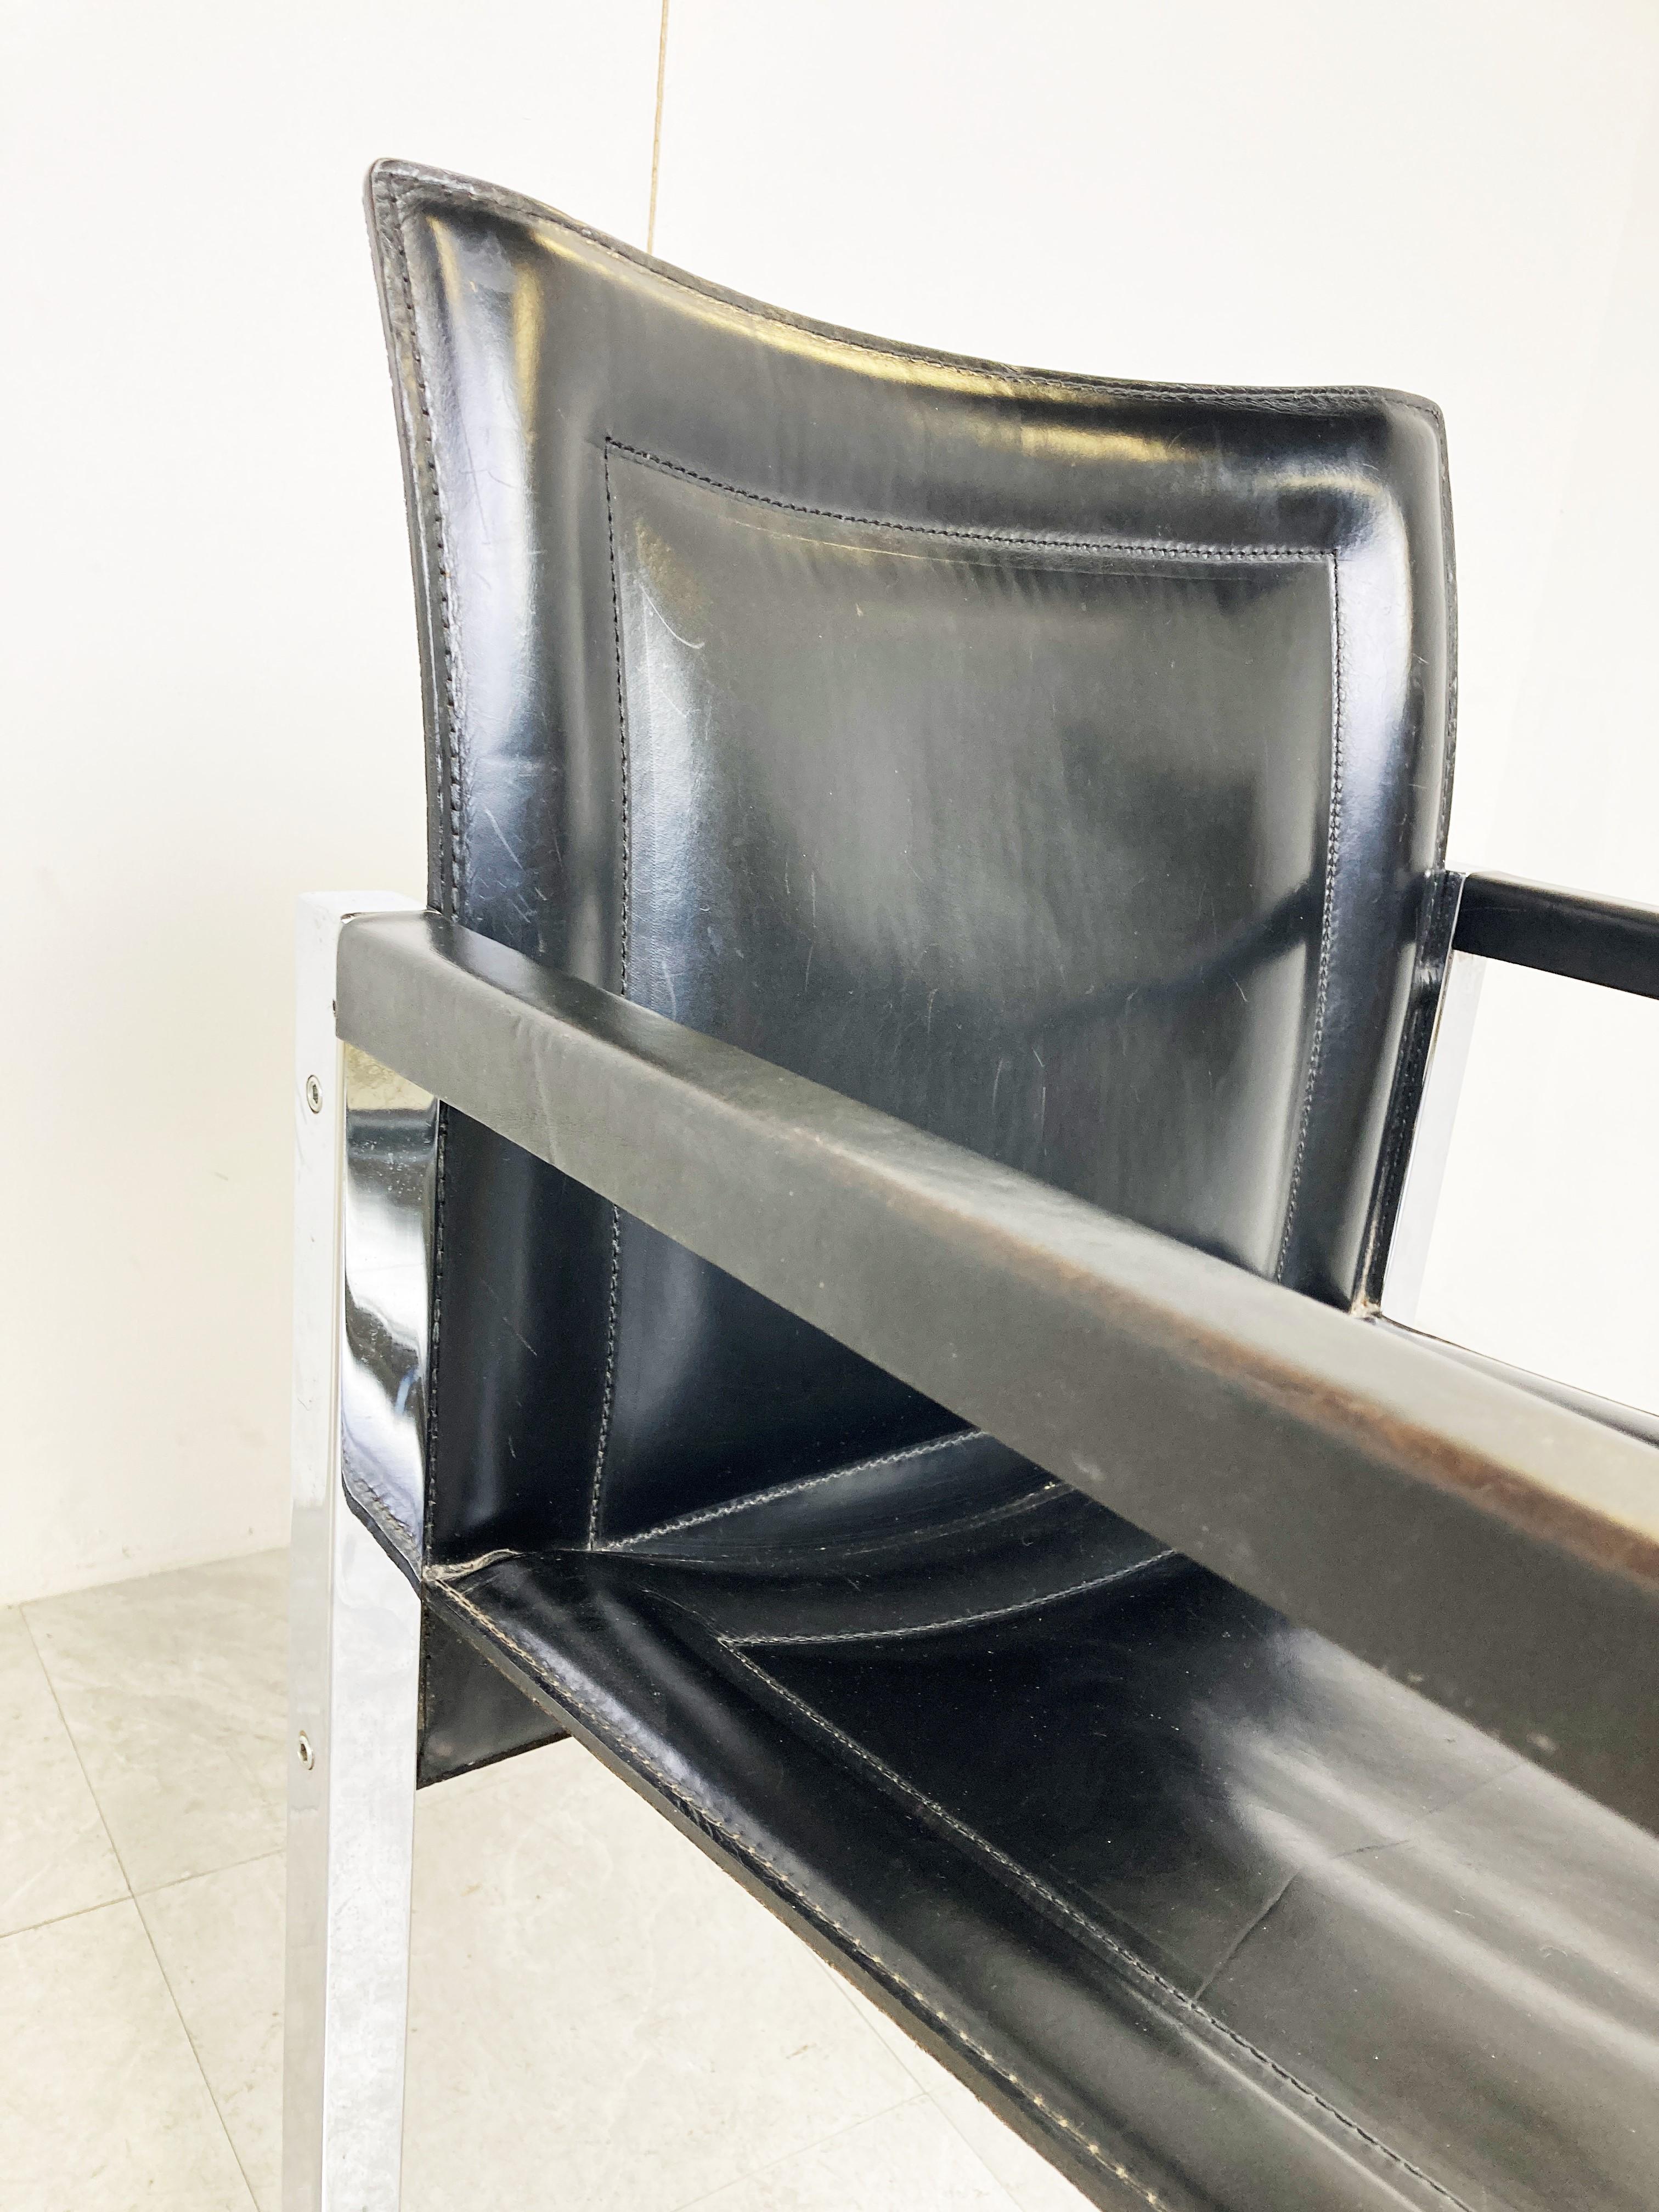 Vintage black leather dining chairs or armchairs with chromed metal frames.

Rare model with armrests.

Good condition.

1980s - Italy

Dimensions:
Height: 80cm/31.49